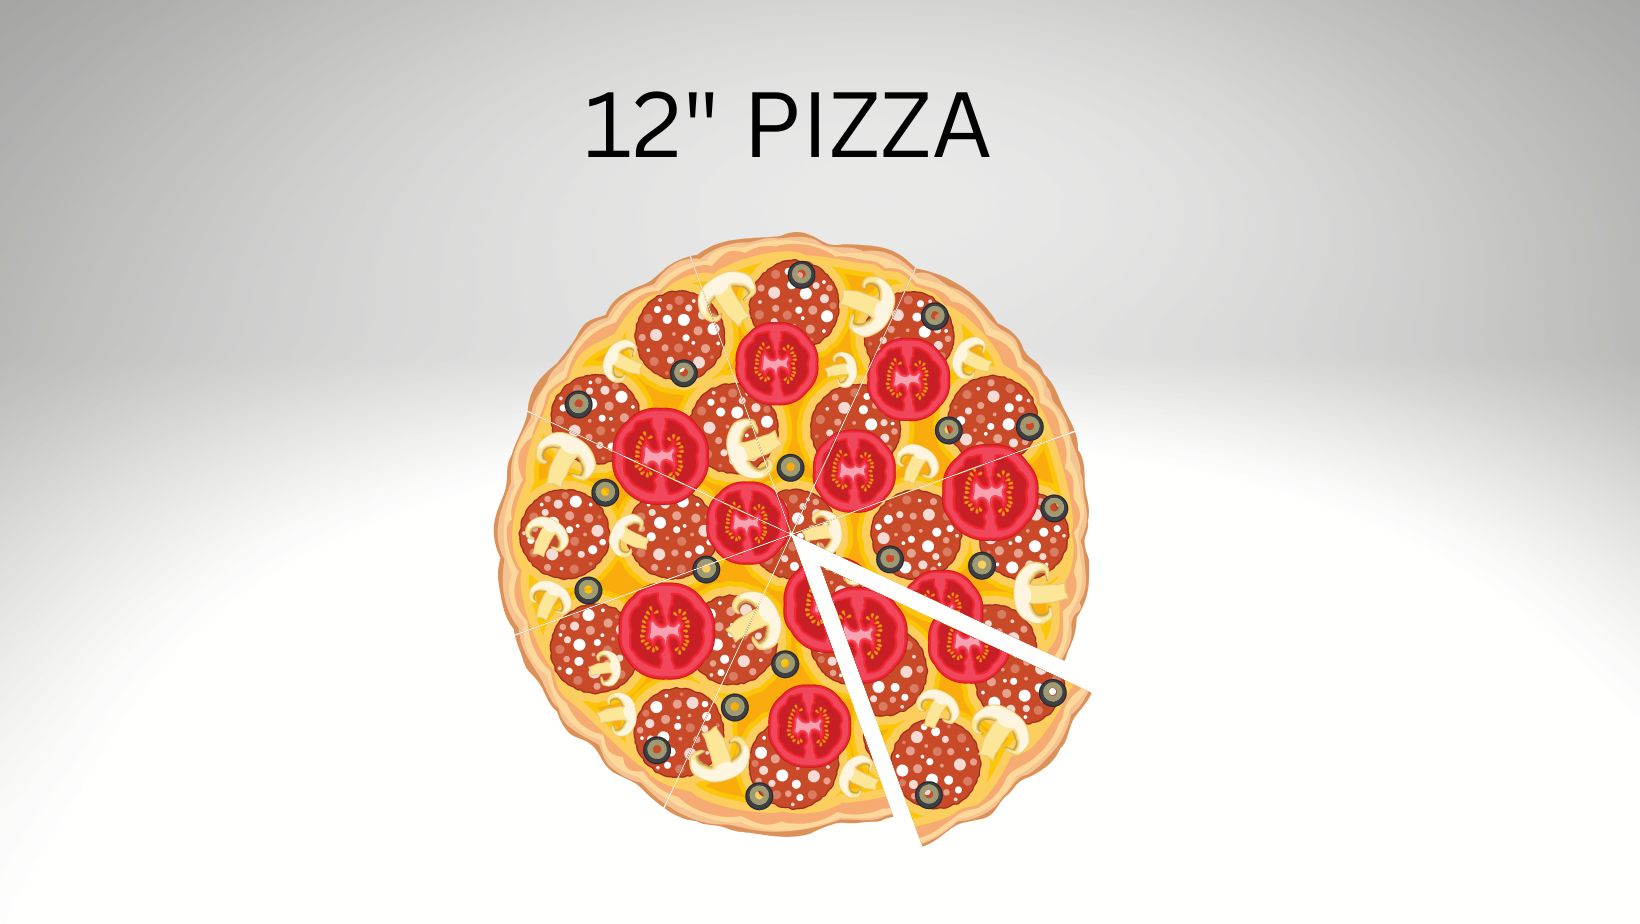 How big is a 12 pizza?